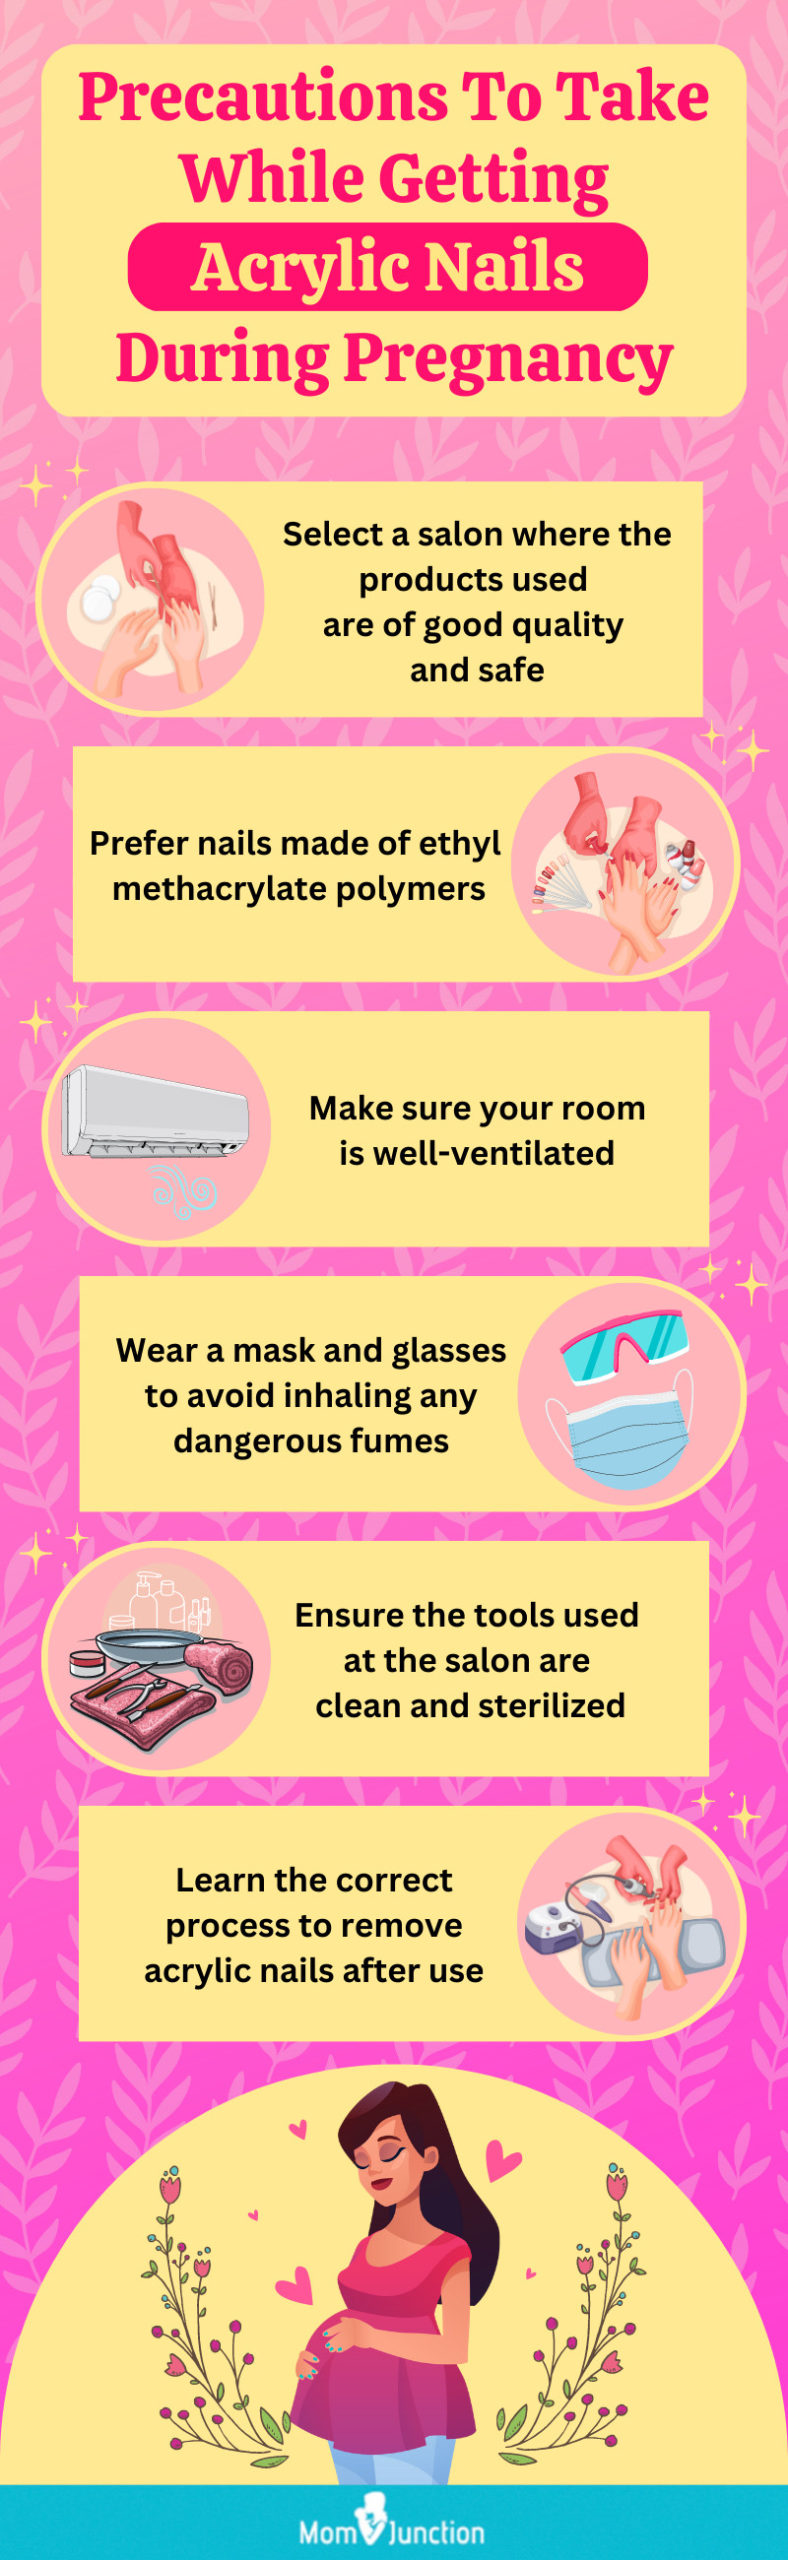 measures for using acrylic nails in pregnancy (infographic)